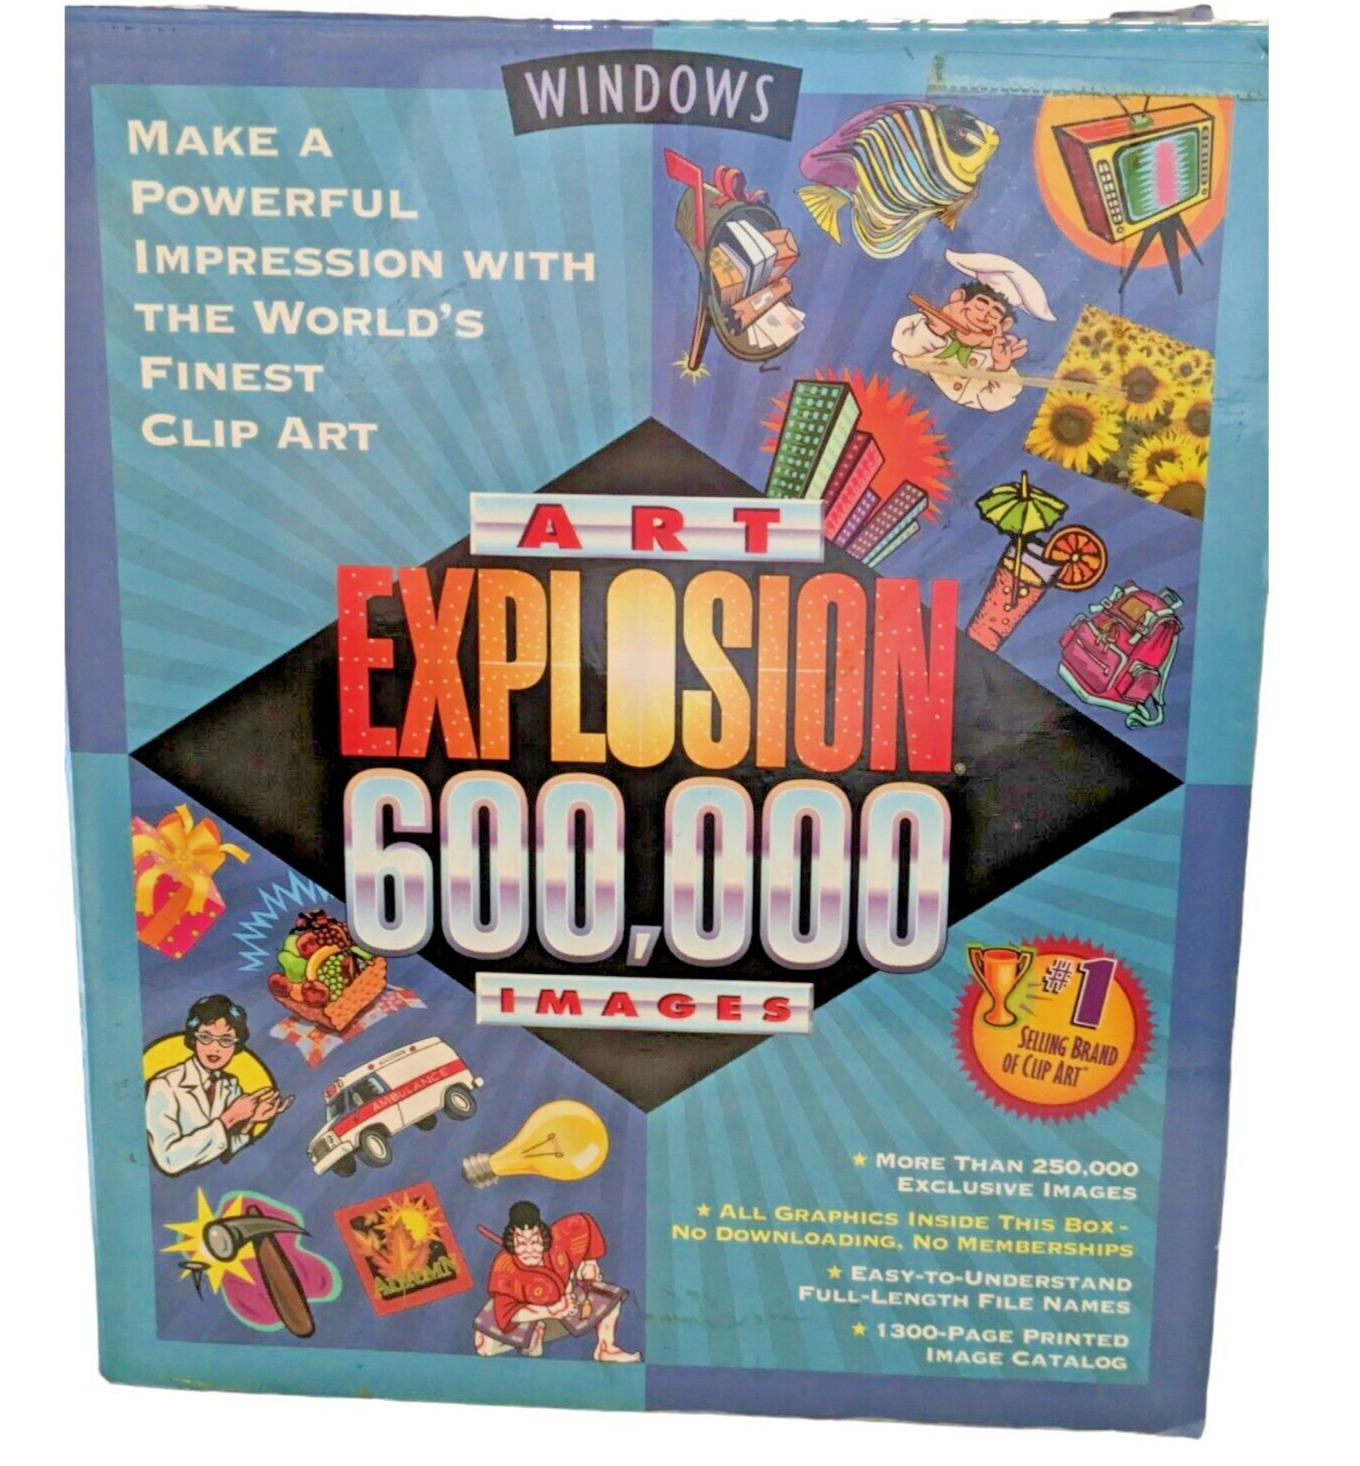 Art Explosion Royalty Free 600000 Images Manual & 28 Never Used CDs One Missing